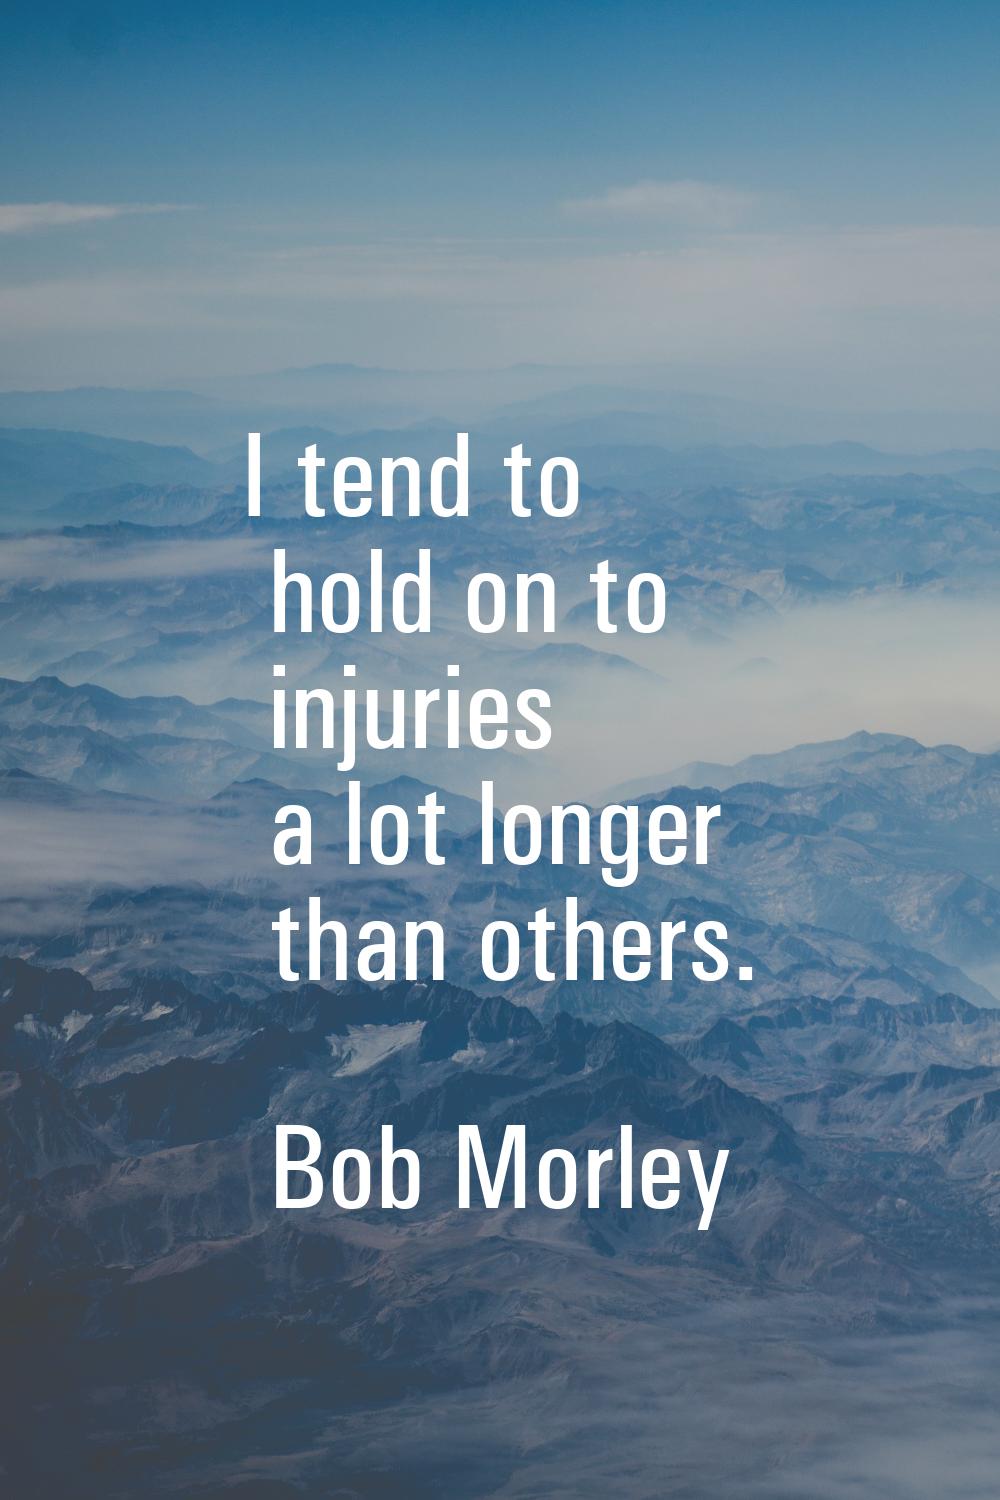 I tend to hold on to injuries a lot longer than others.